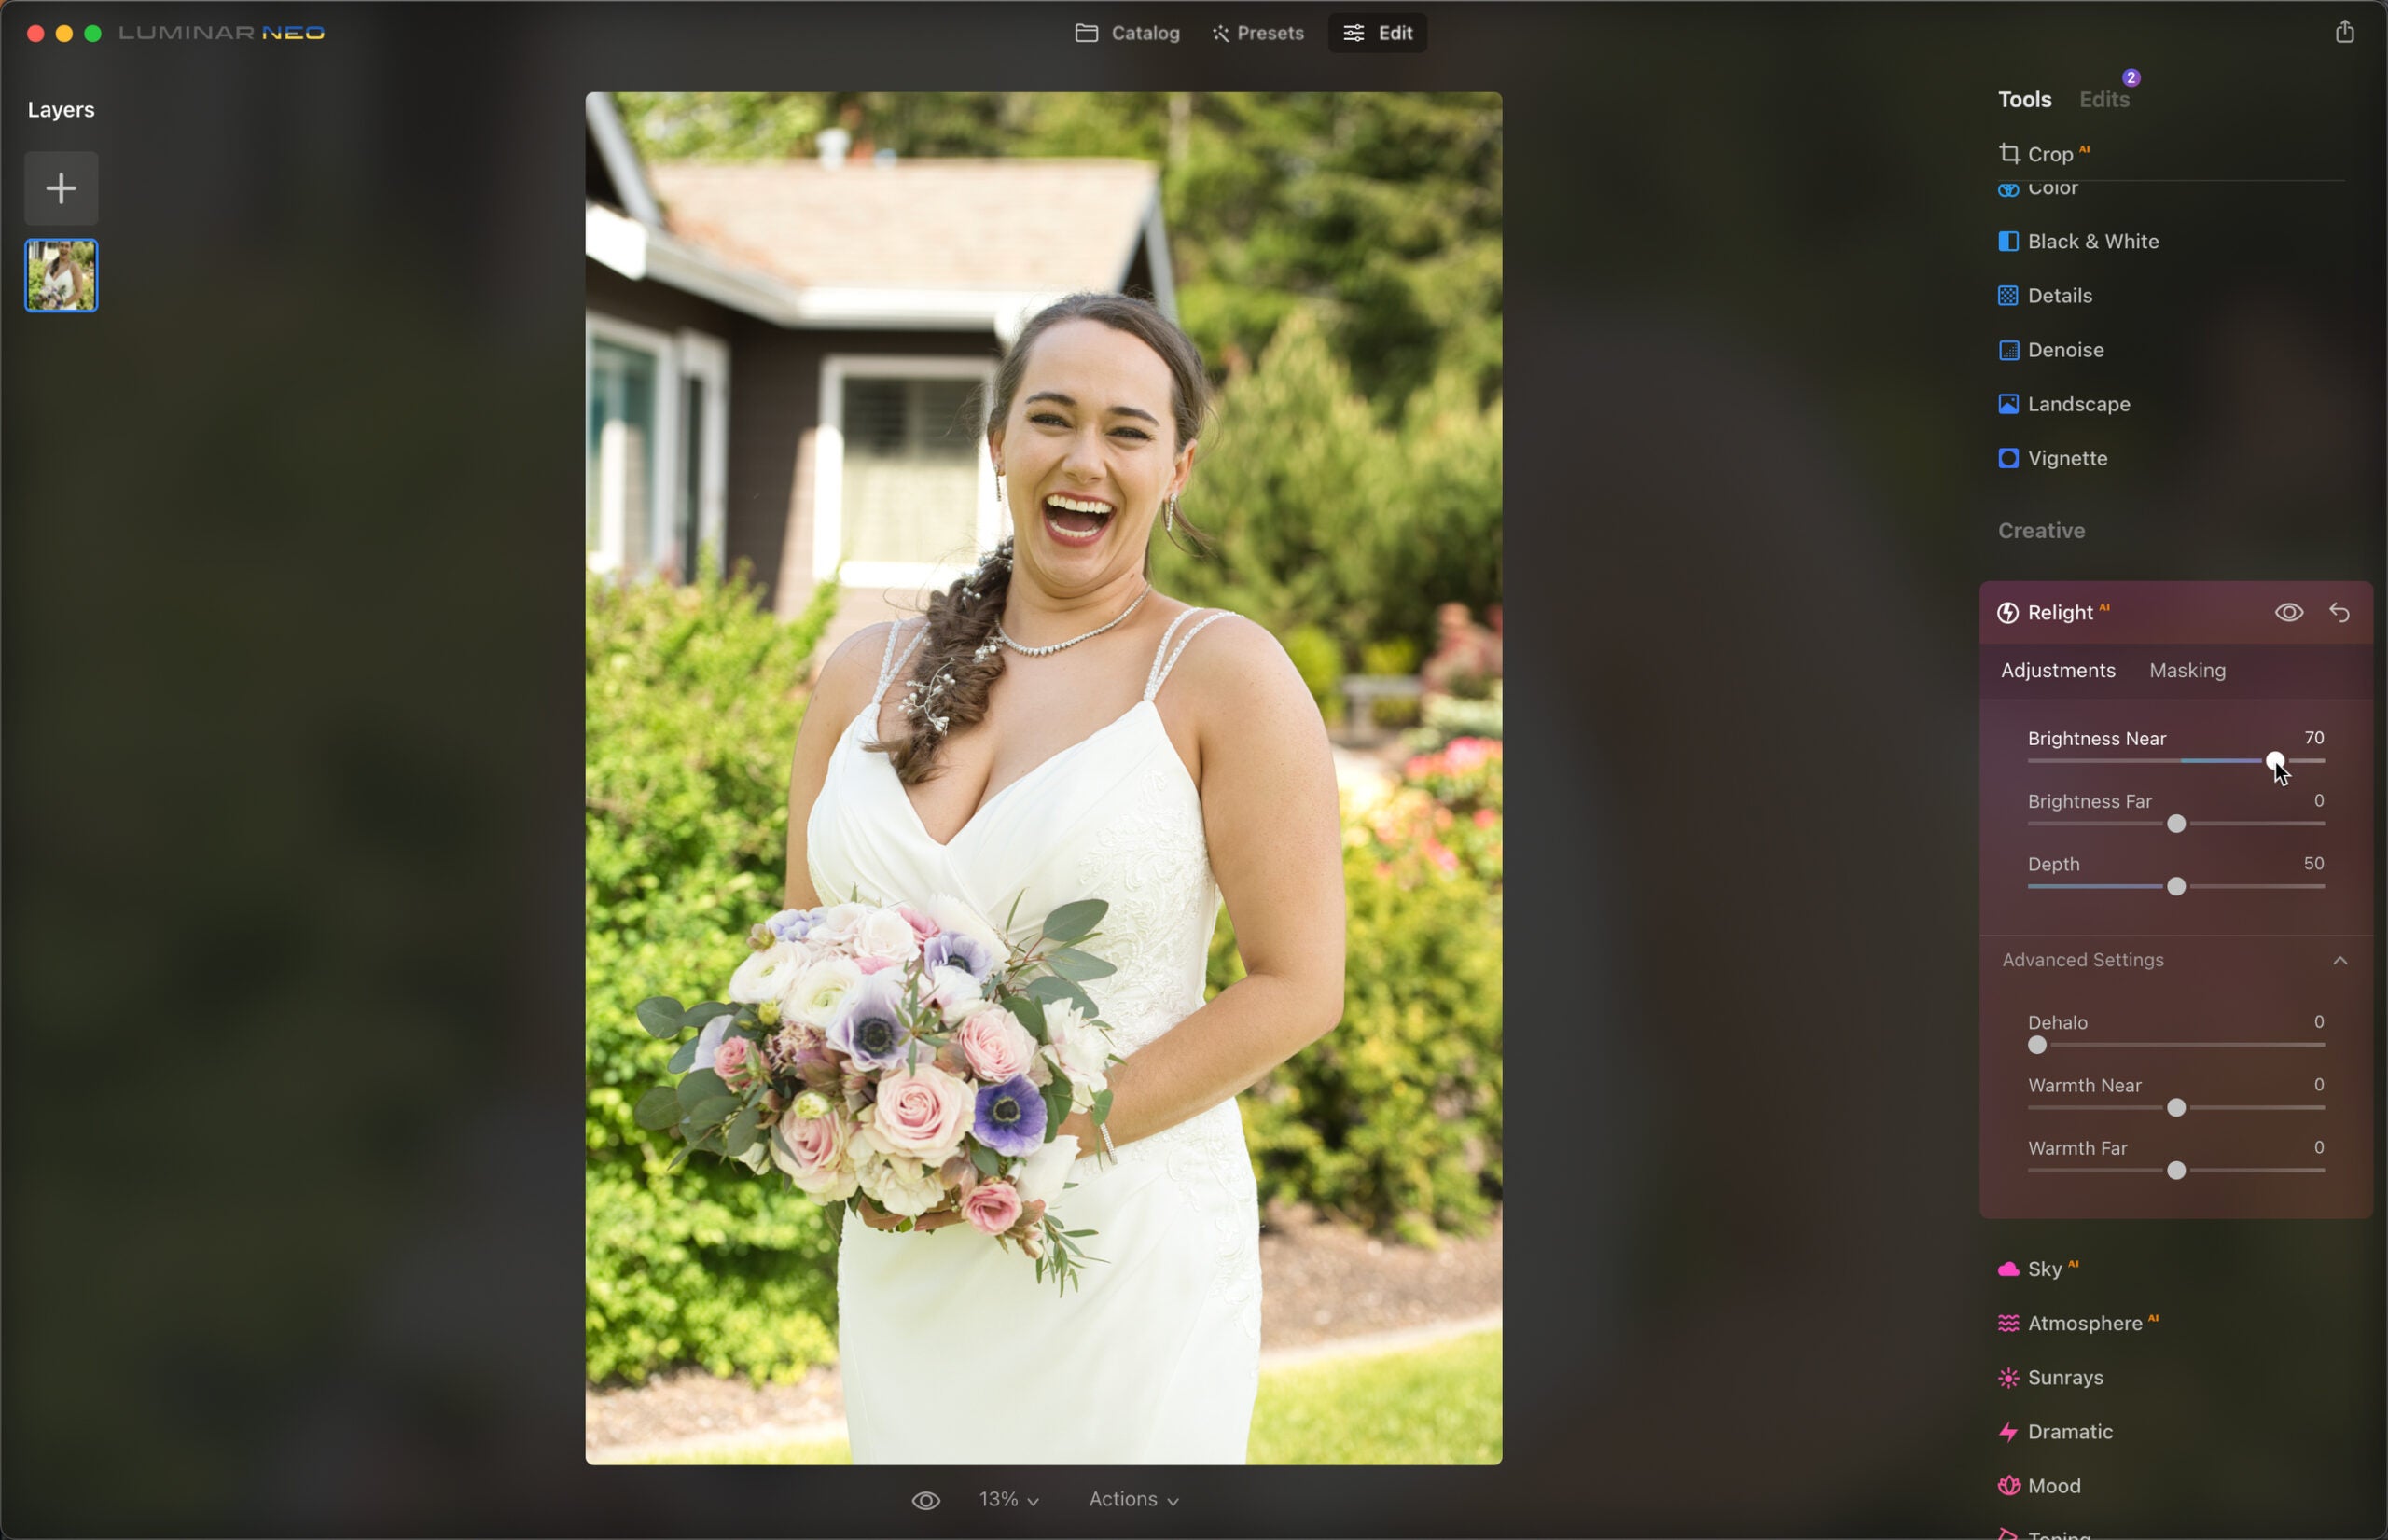 Luminar Neo’s Relight AI tool brightens the bride, which it has identified as the foreground object.